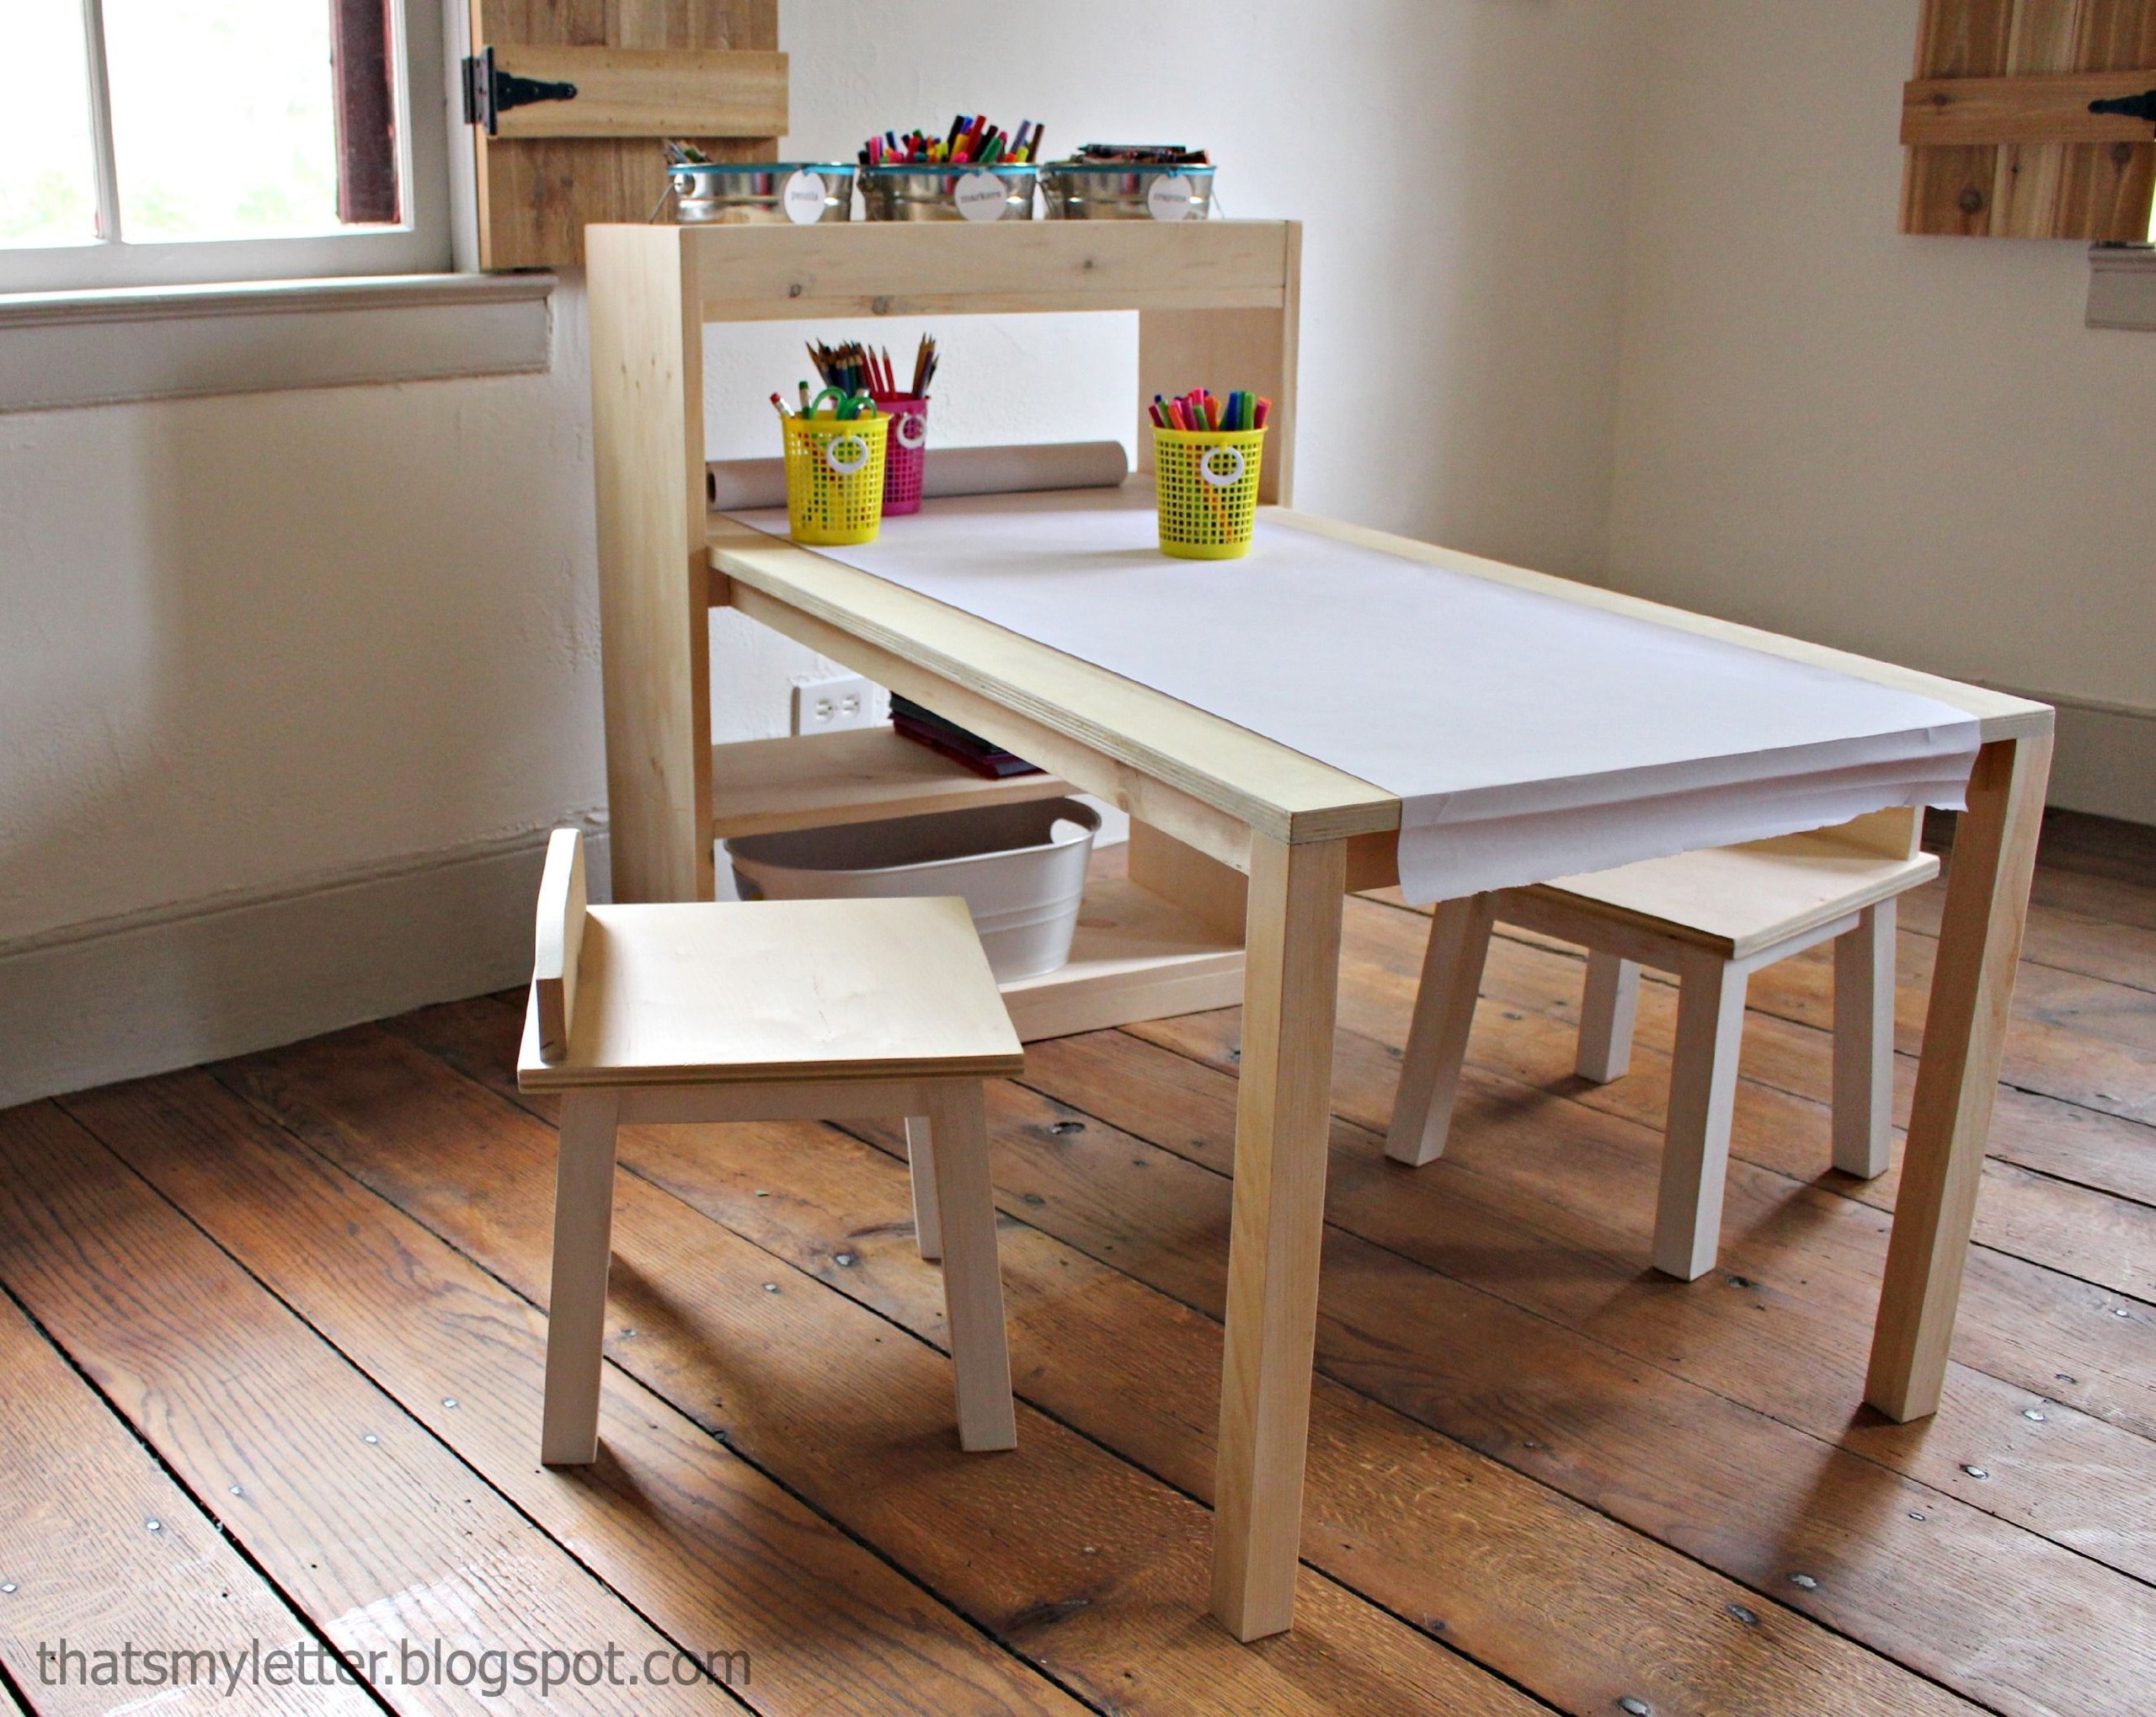 childrens art table and chairs